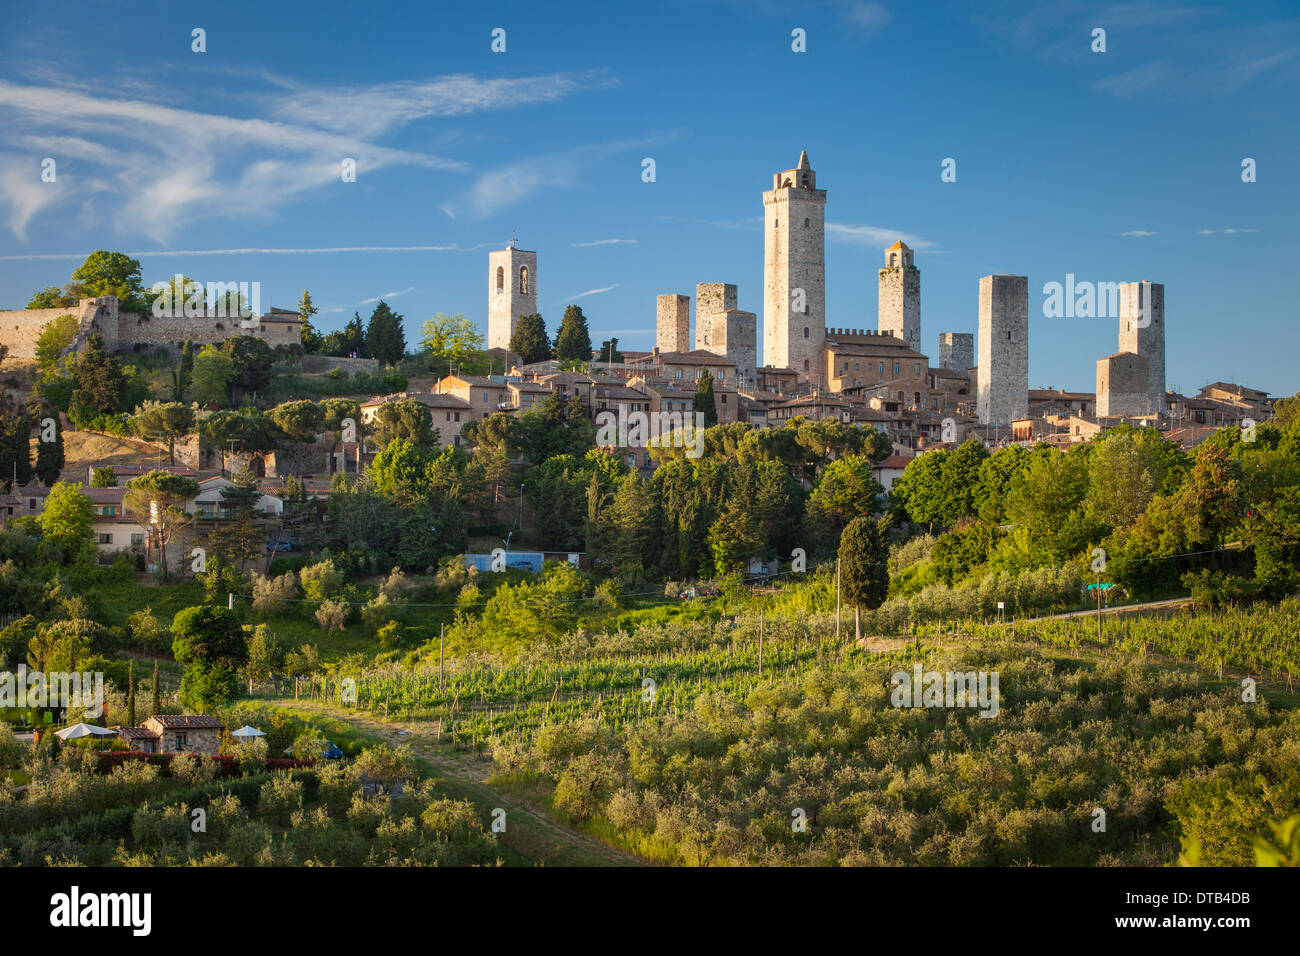 Evening view over medieval town of San Gimignano, Tuscany, Italy Stock Photo